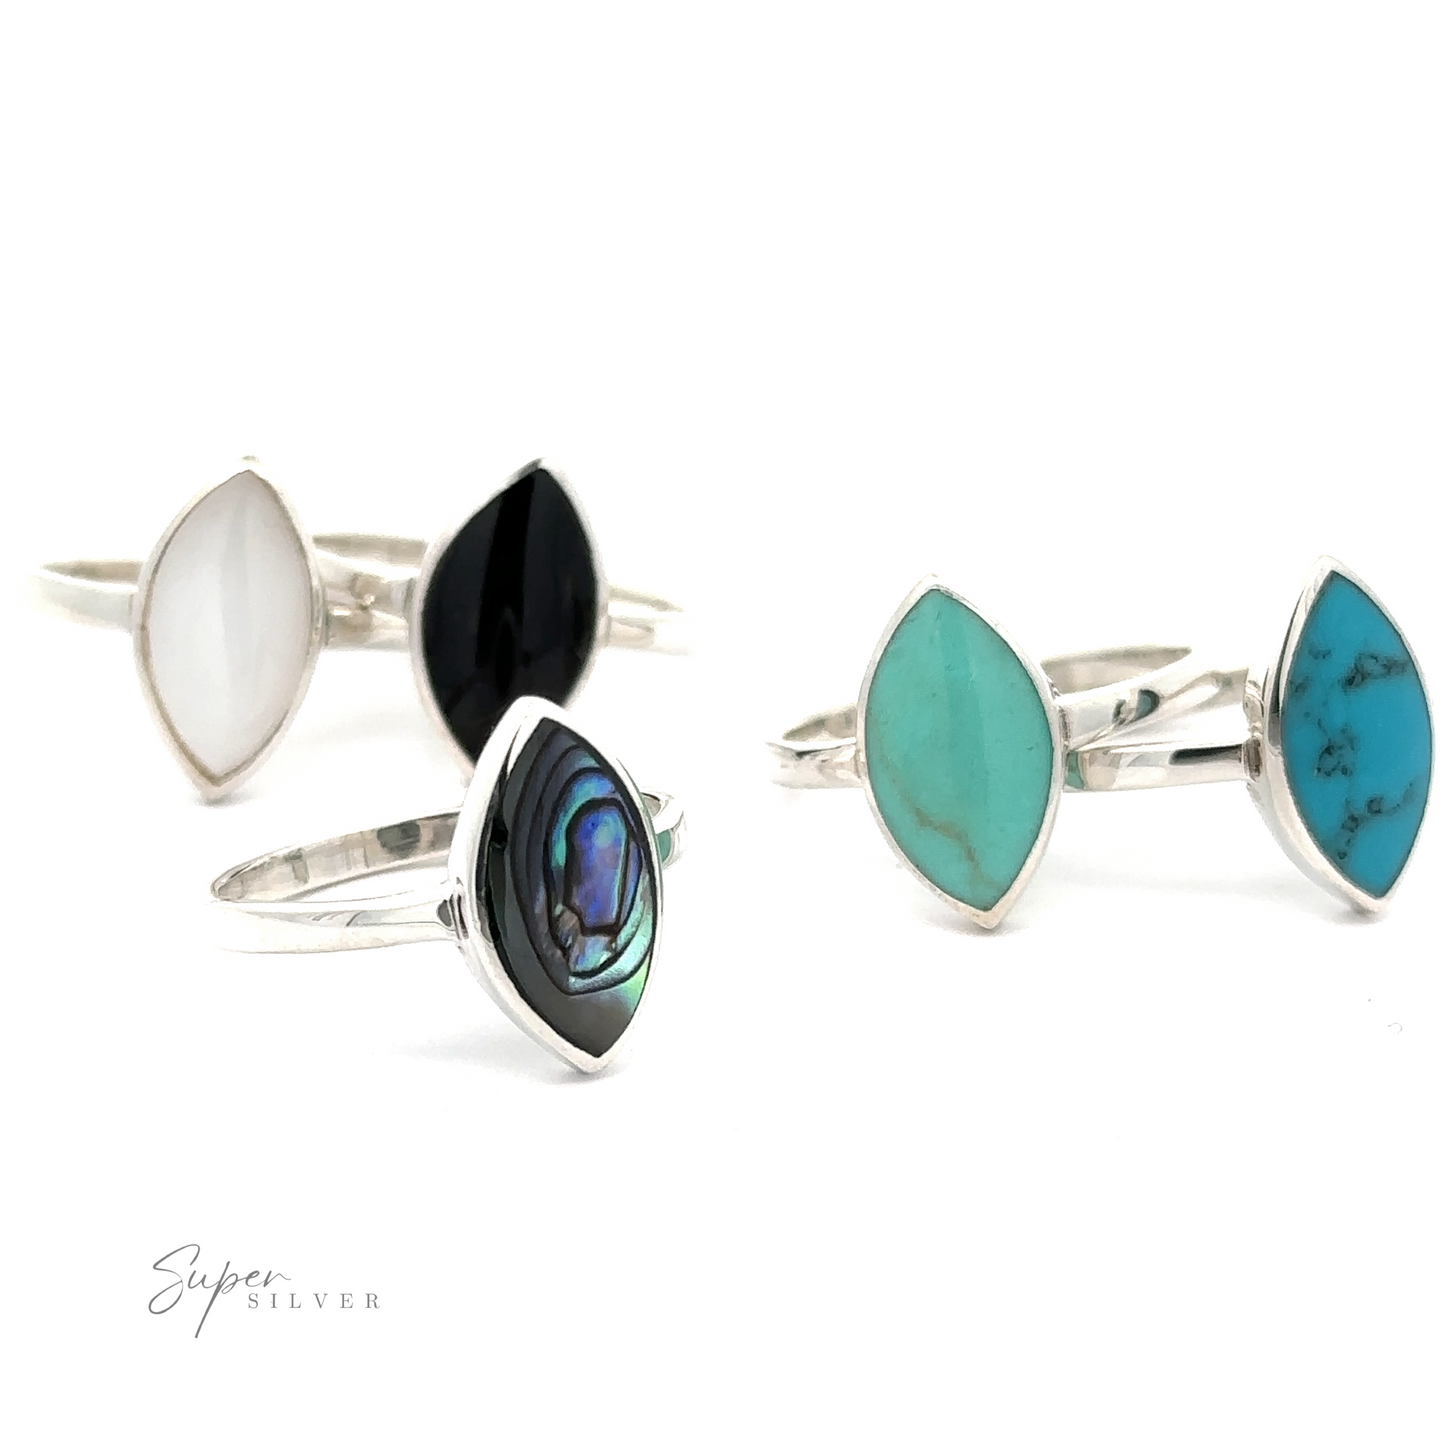 A set of Classic Marquise Inlaid Stone Rings featuring a variety of stone accents, including stunning turquoise stones.